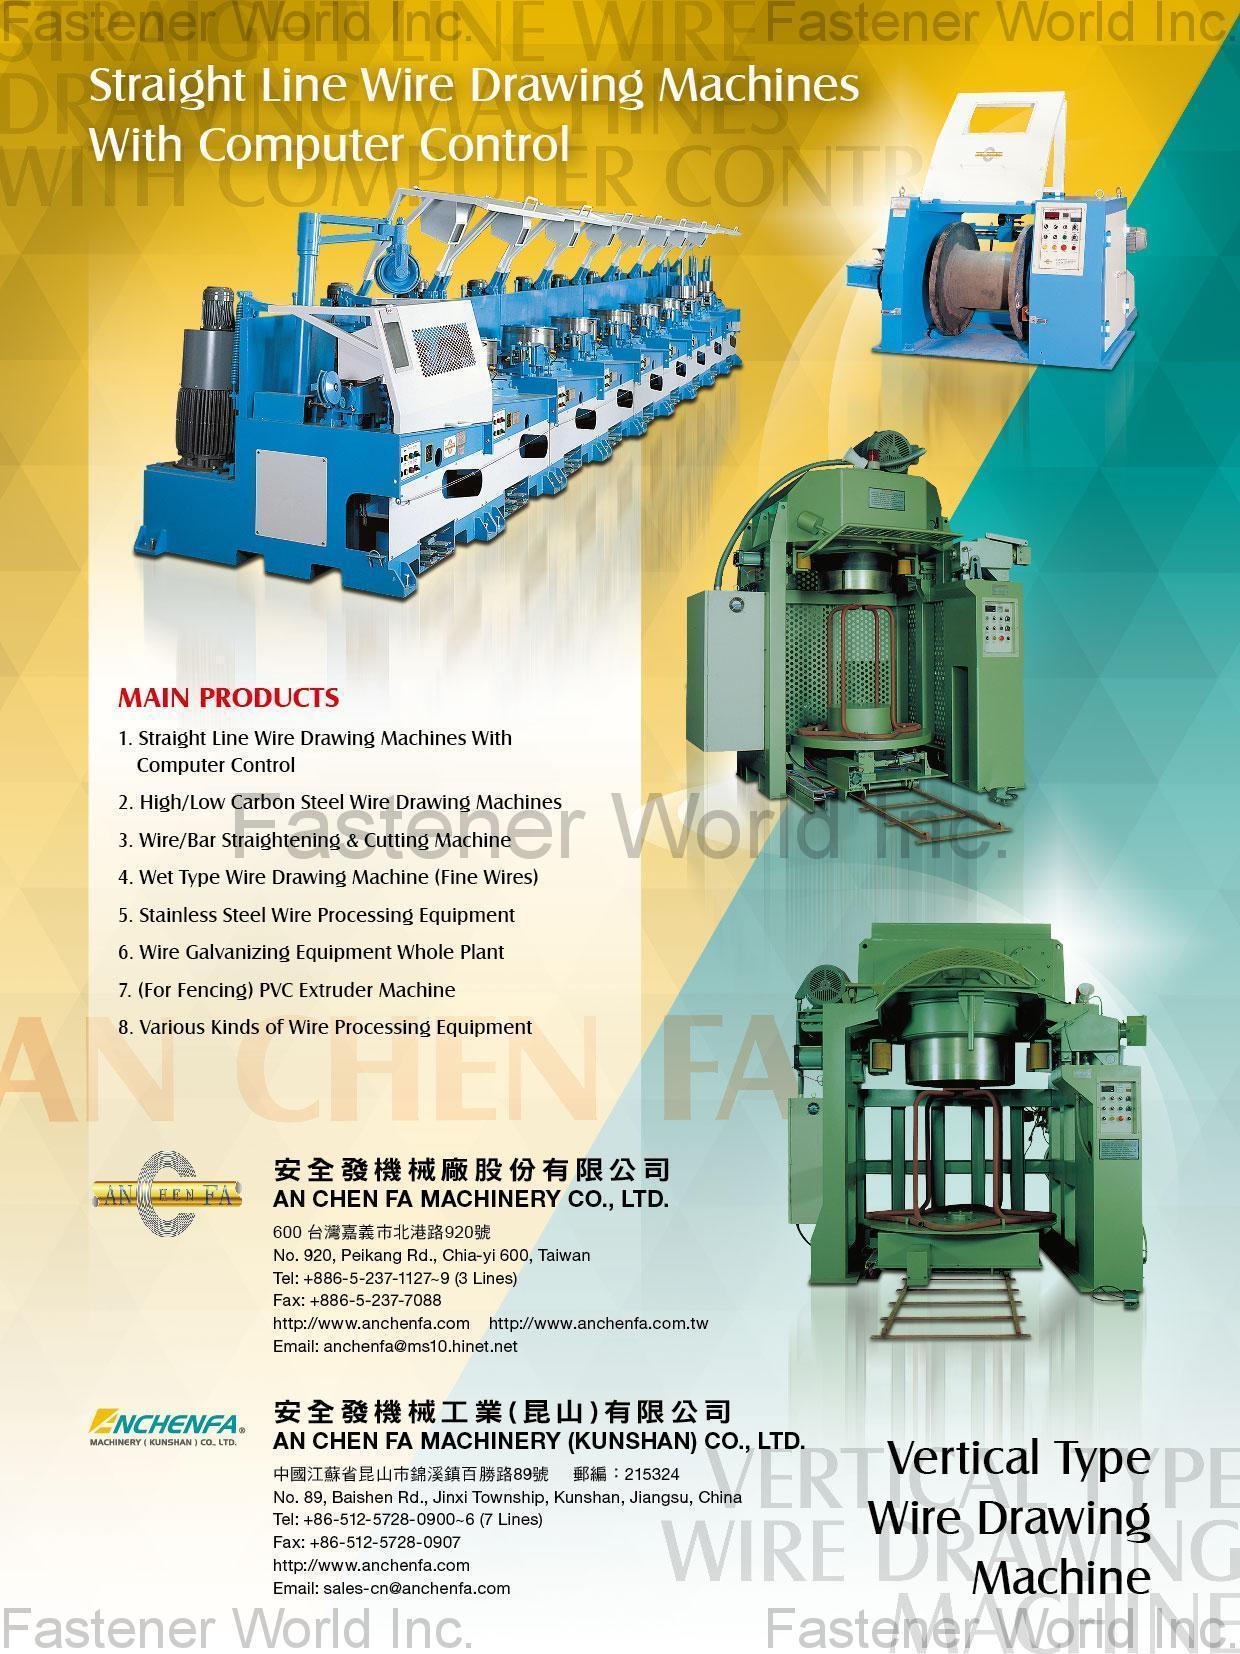 AN CHEN FA MACHINERY CO., LTD.  , Vertical Type Wire Drawing Machine, Straight Line Wire Drawing Machines With Turner Control , Wire Drawing Machine